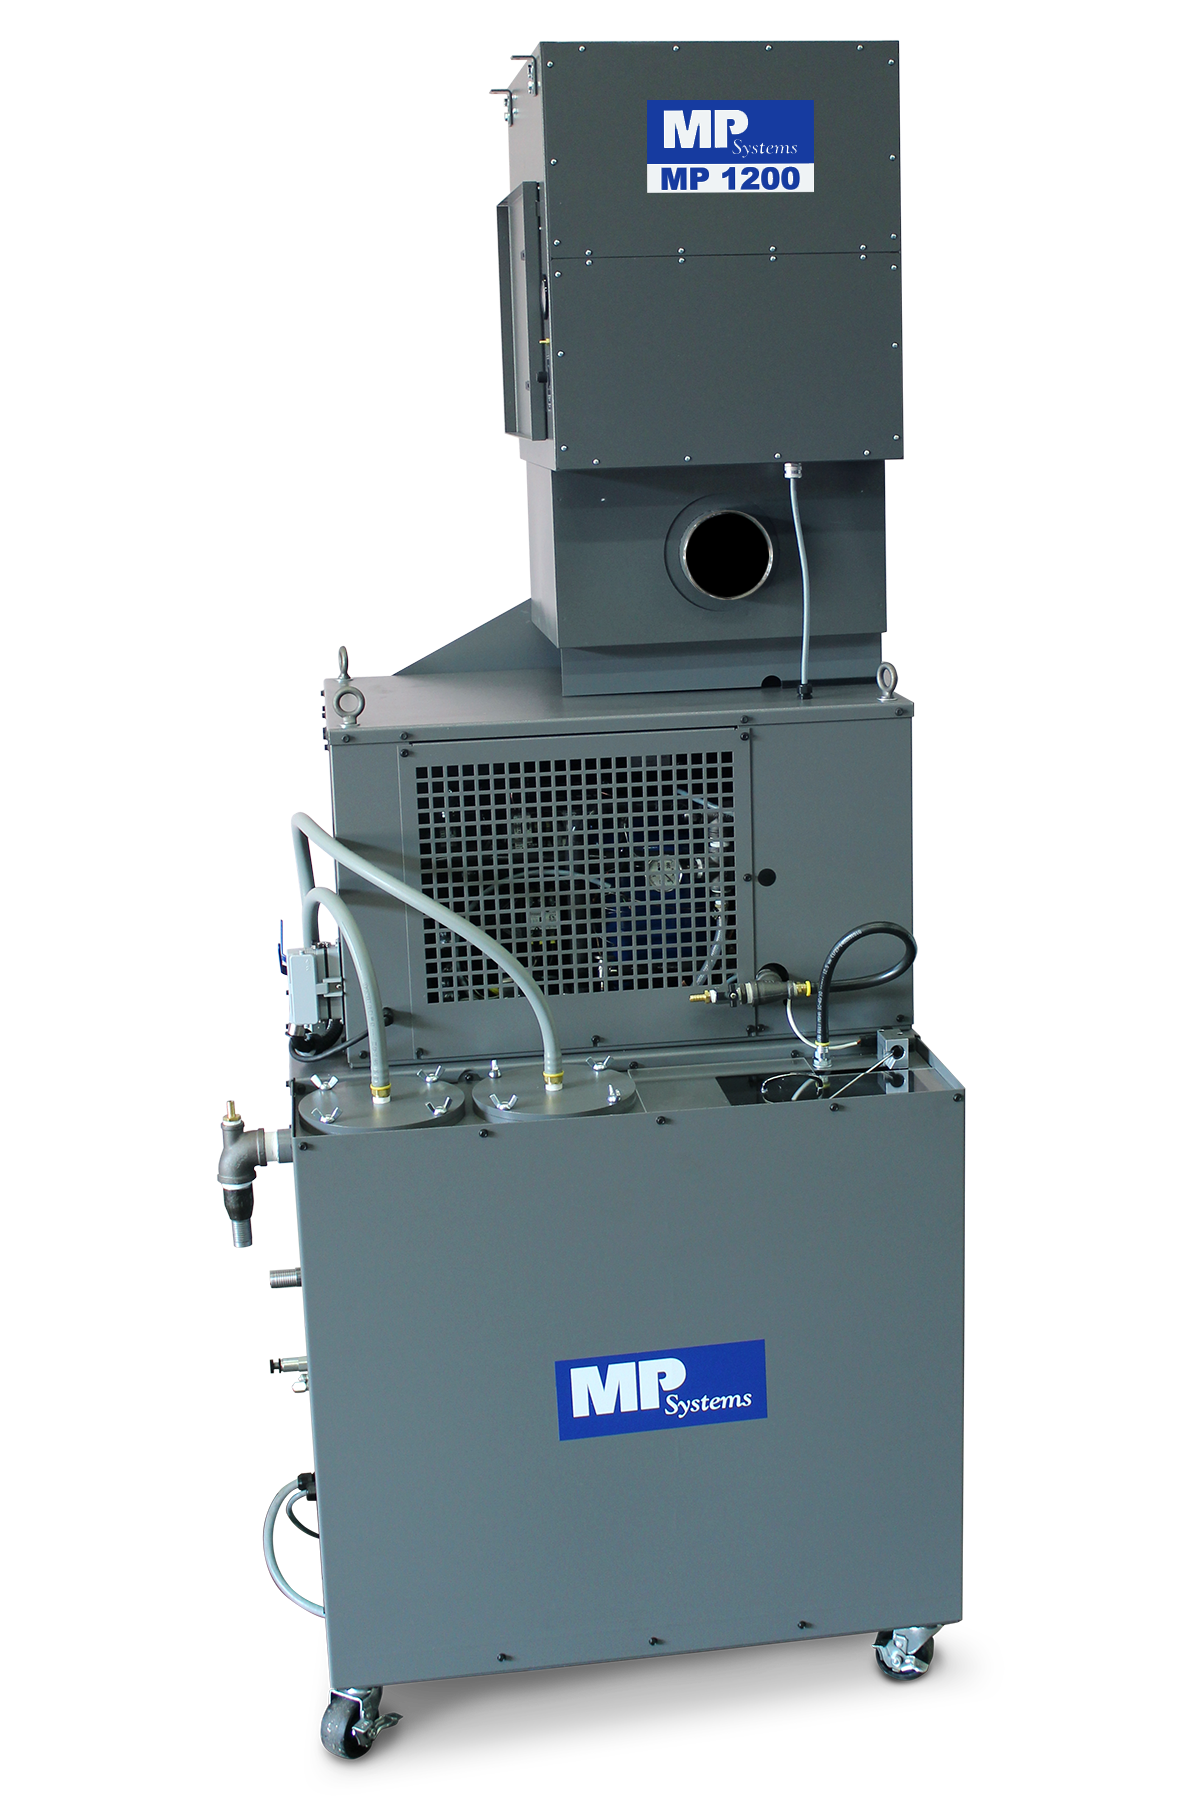 MP System's Vertically Integrated High Pressure Coolant and Mist Collection System